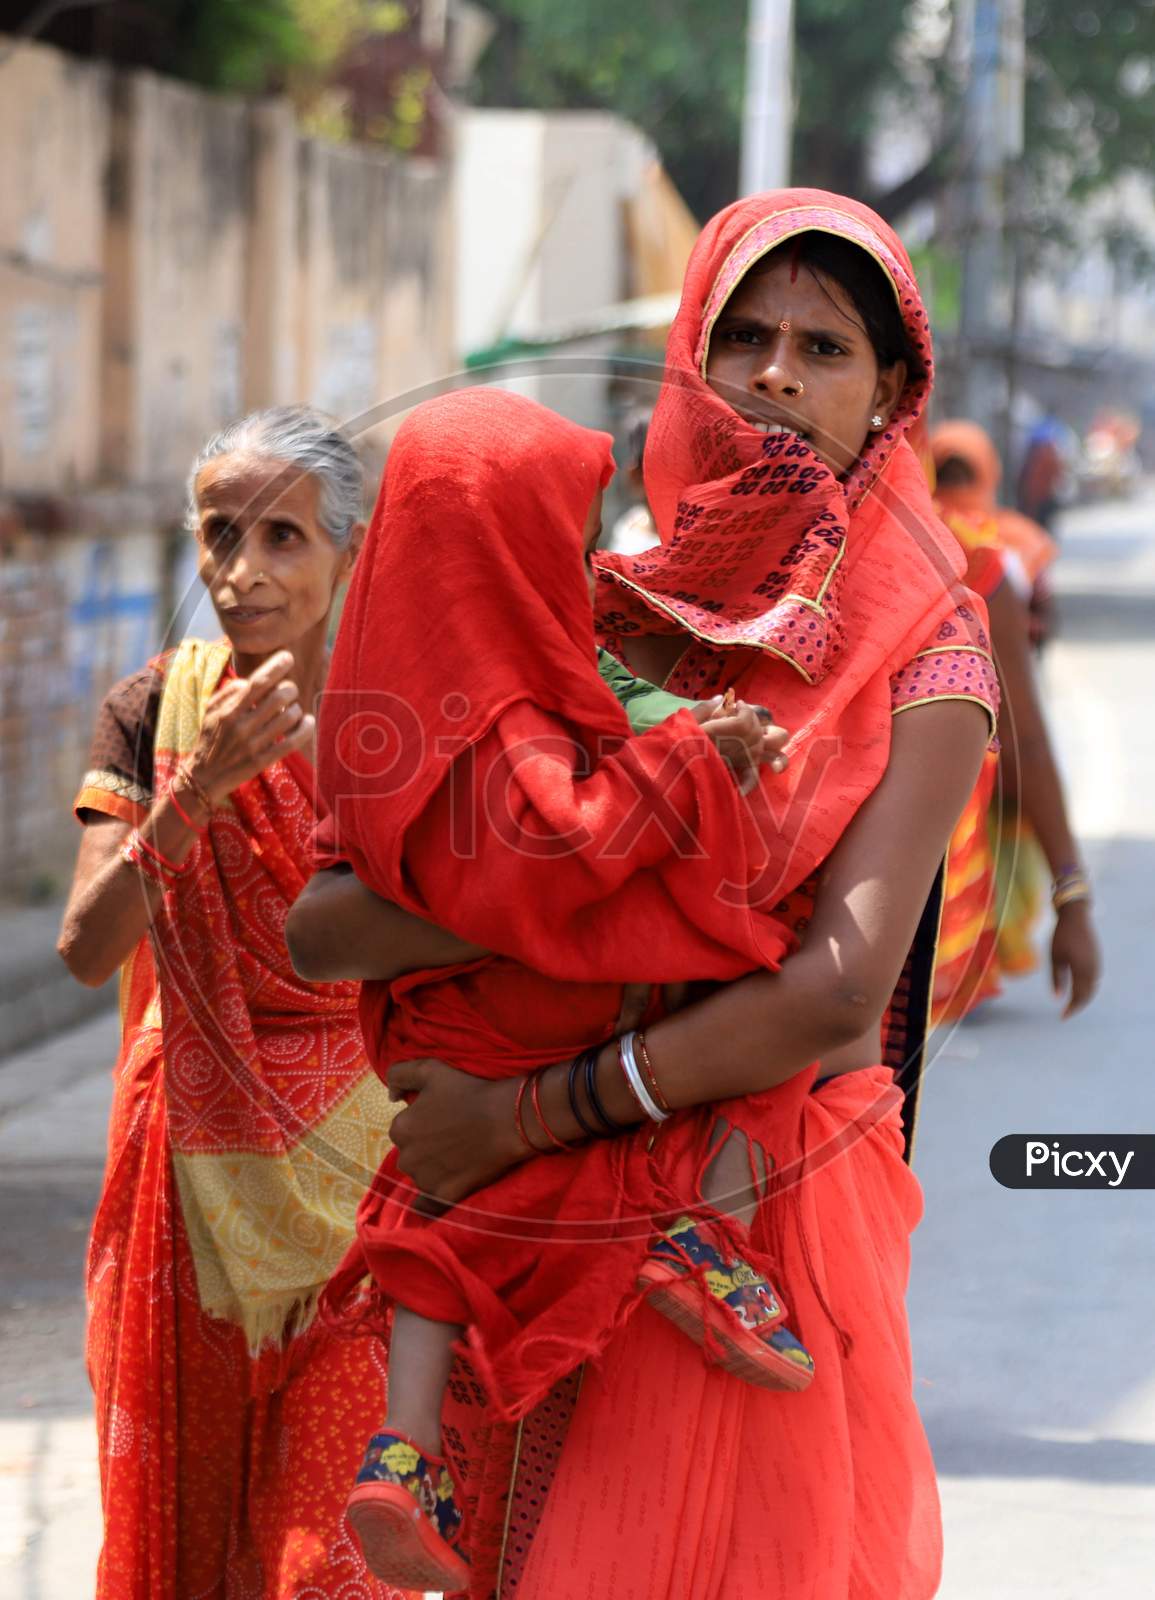 A Woman With Her Child Outside Of A Bank To Withdraw Money During A Nationwide Lockdown To Slow The Spreading Of The Coronavirus Disease (Covid-19), In Prayagraj, April, 15, 2020.